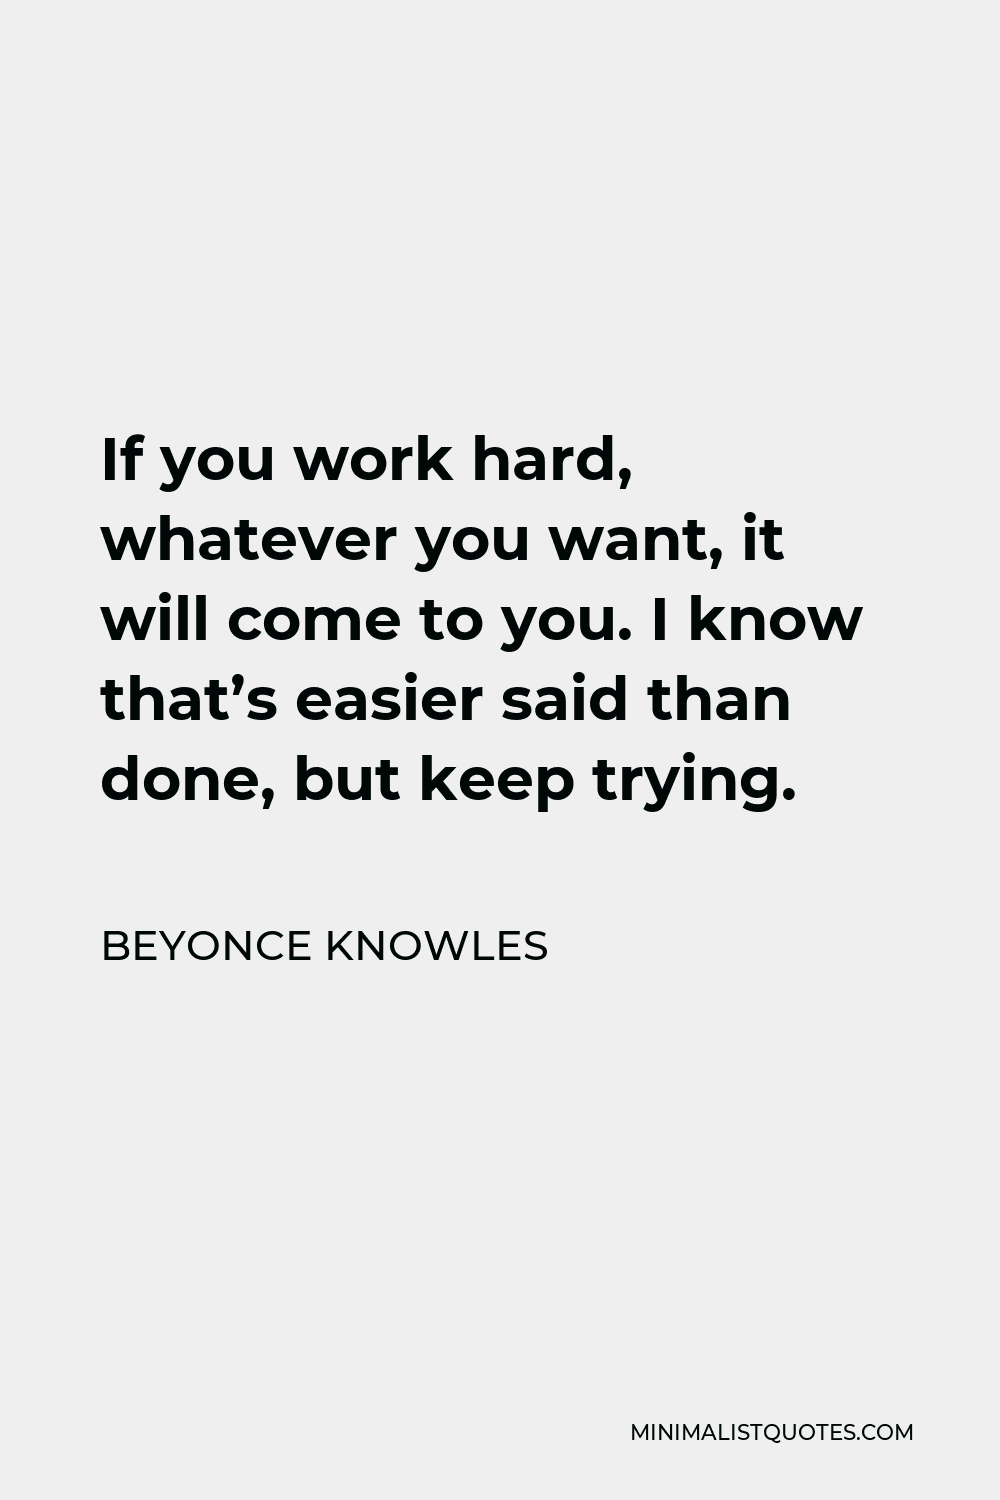 Beyonce Knowles Quote - If you work hard, whatever you want, it will come to you. I know that’s easier said than done, but keep trying.